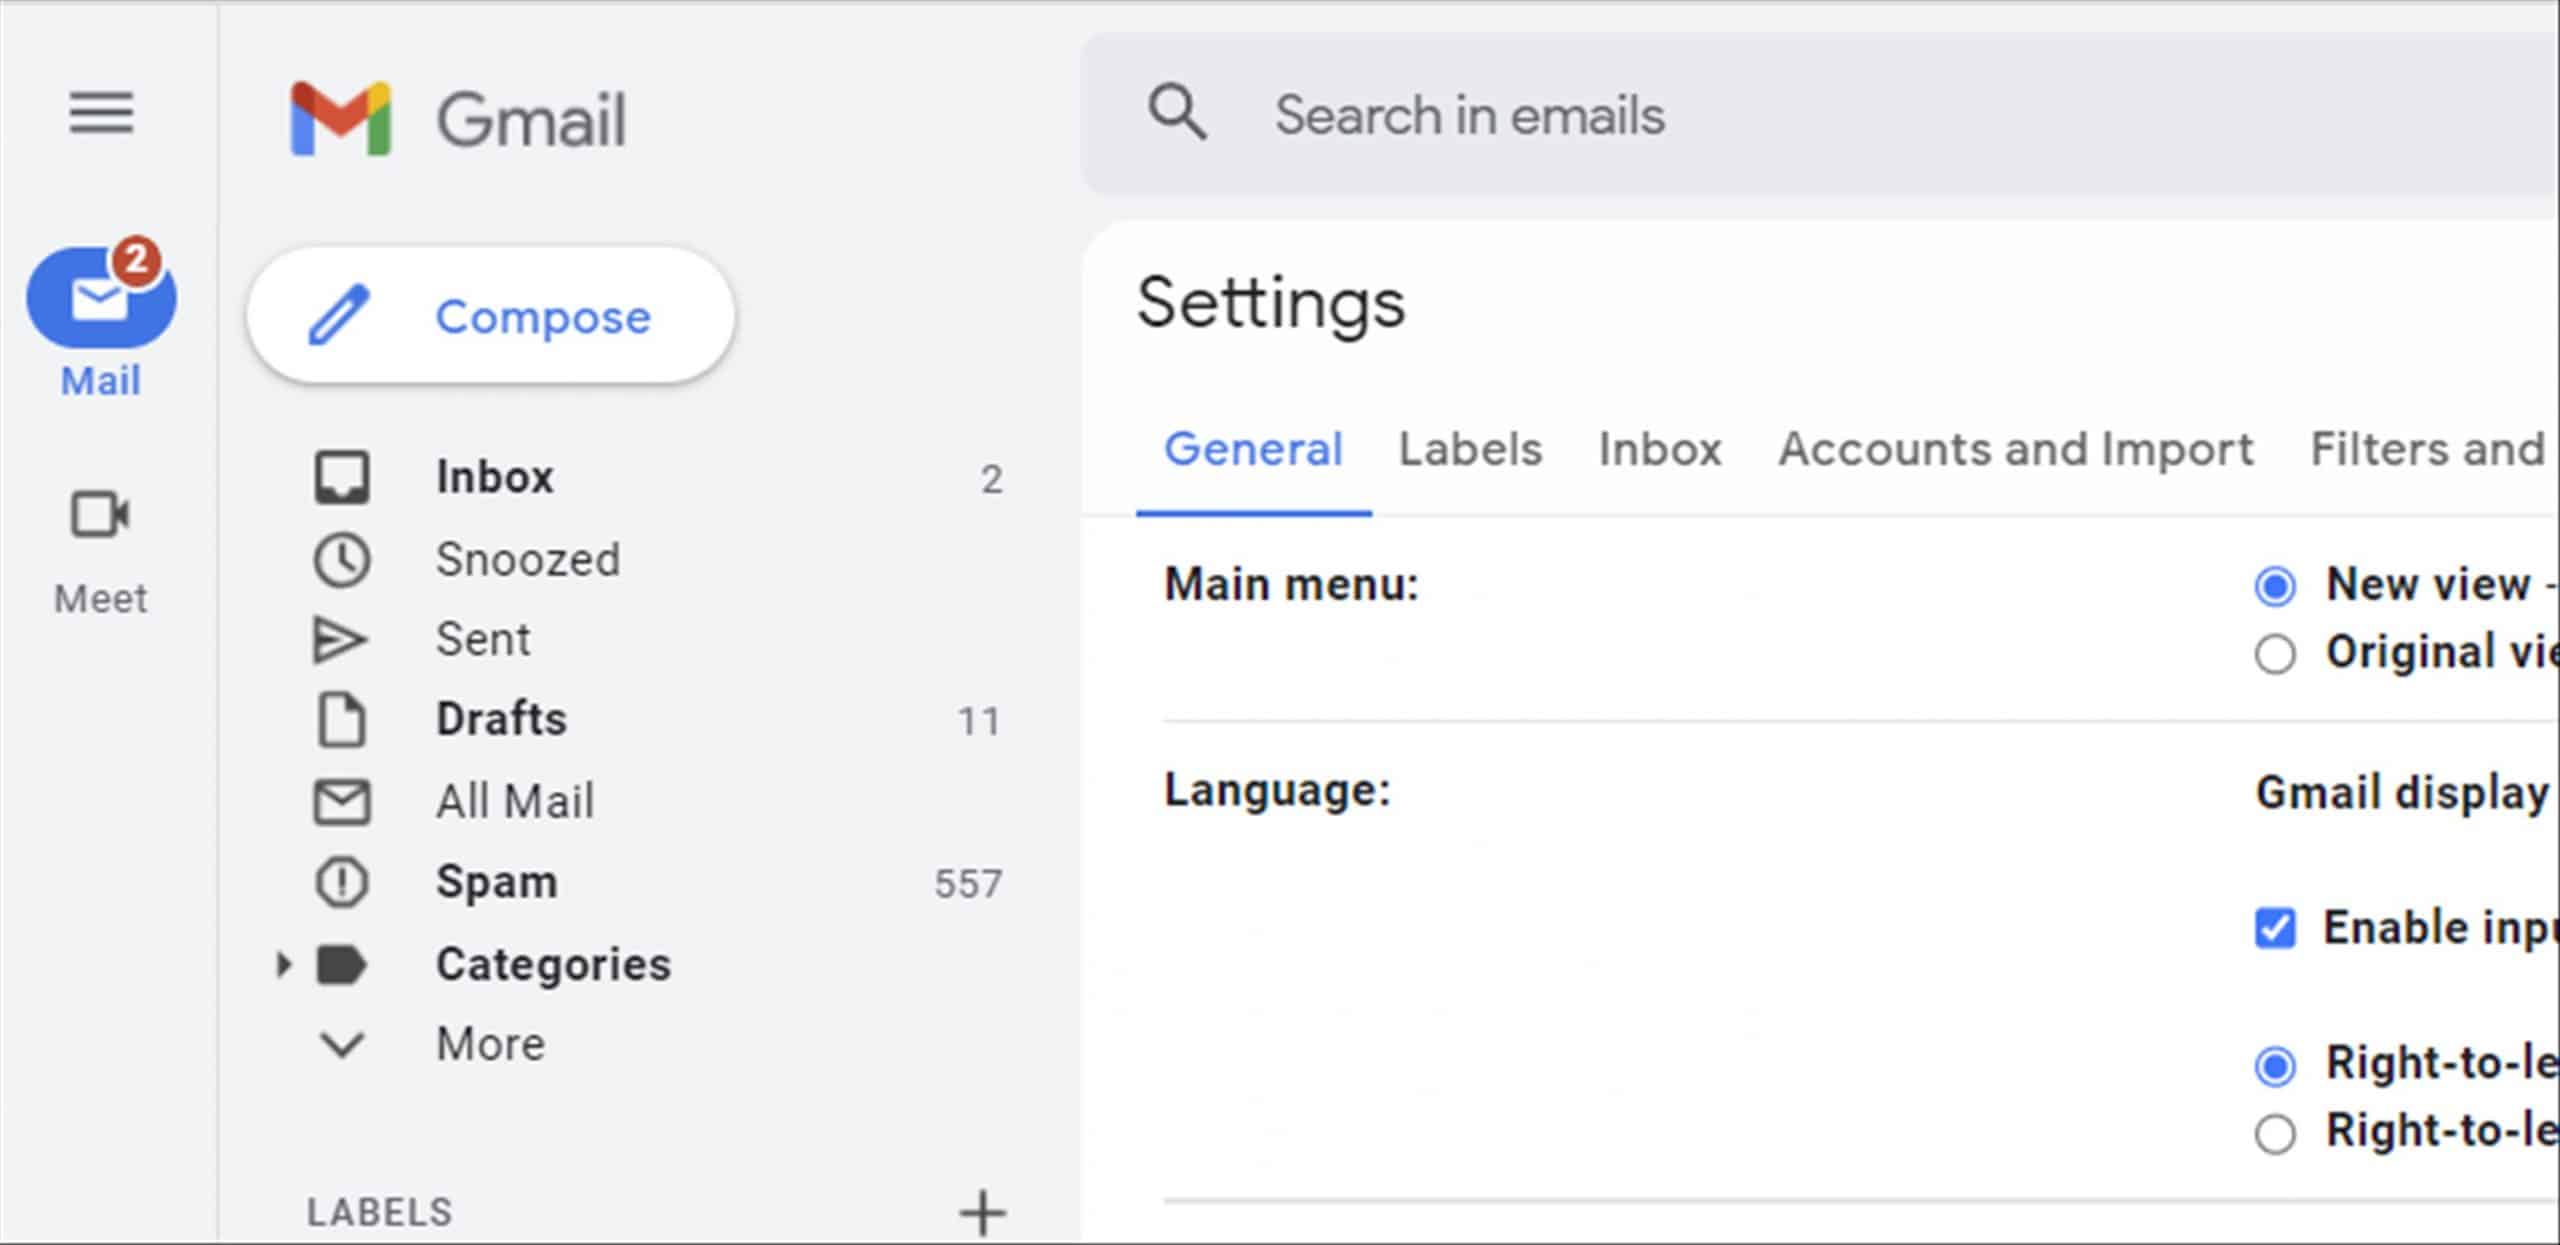 How to hide or disable Google Meet on the new Gmail layout (and other Google Apps)